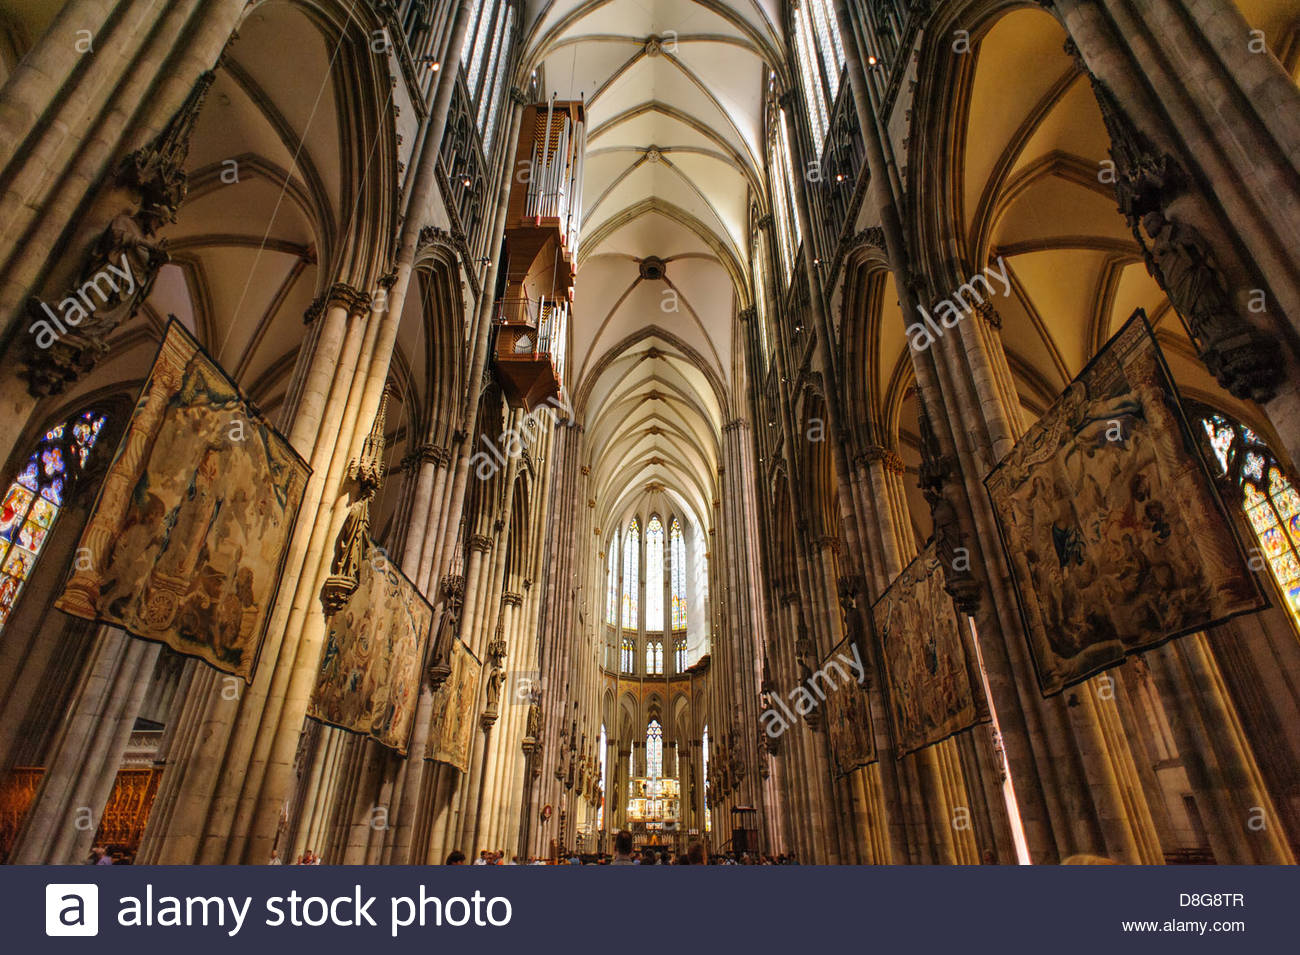 Cologne Cathedral Interior Stock Photo 56906551 Alamy